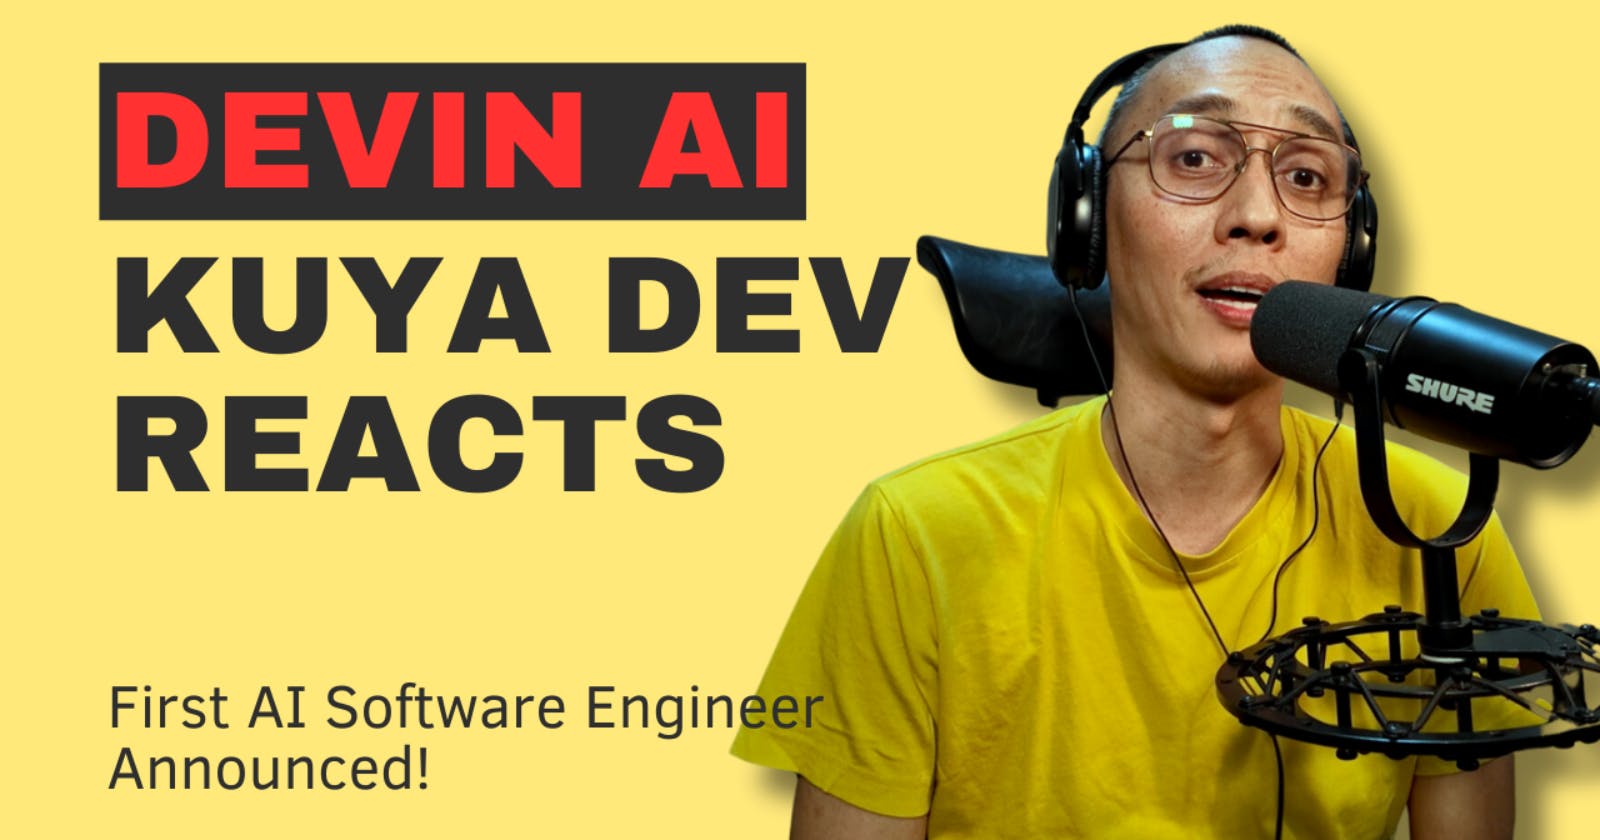 Kuya Dev Reacts to Devin AI, the First AI Software Engineer Announcement Video